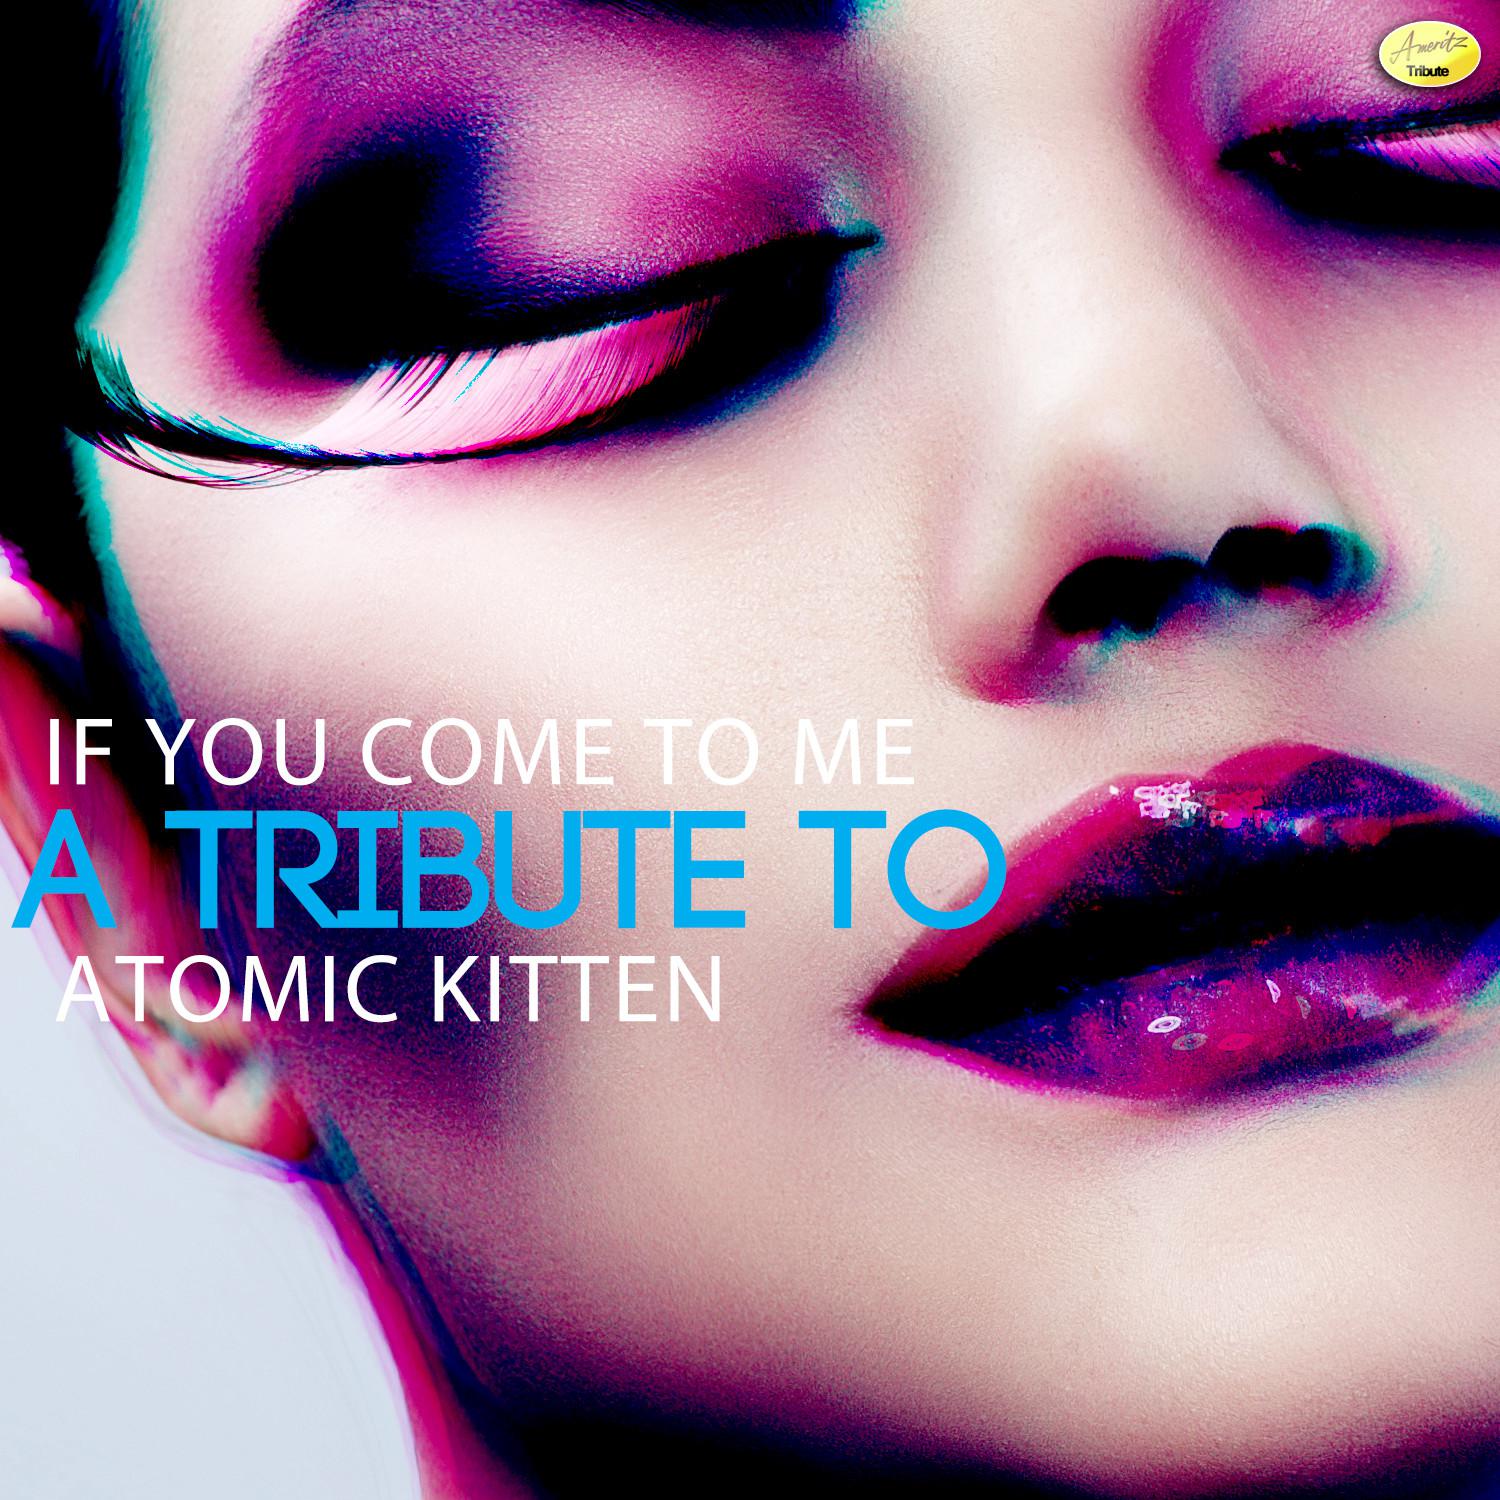 If You Come to Me - A Tribute to Atomic Kitten